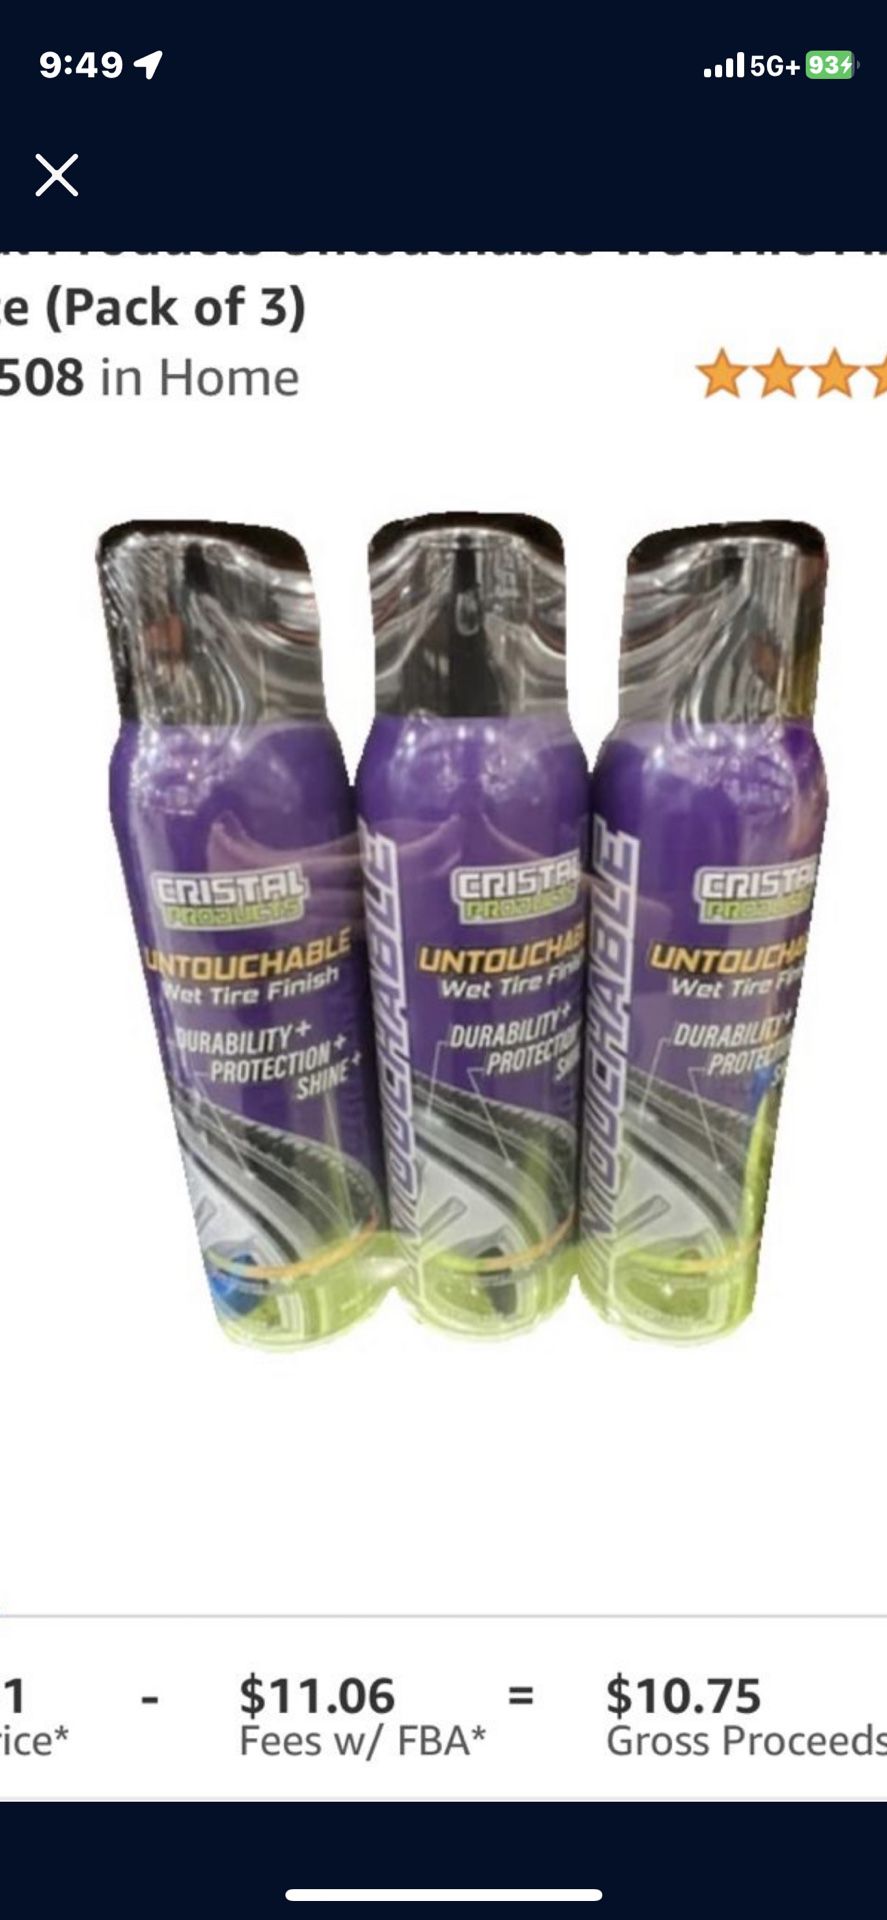 Cristal Products Untouchable Wet Tire Finish, 14 Ounce (Pack of 3)